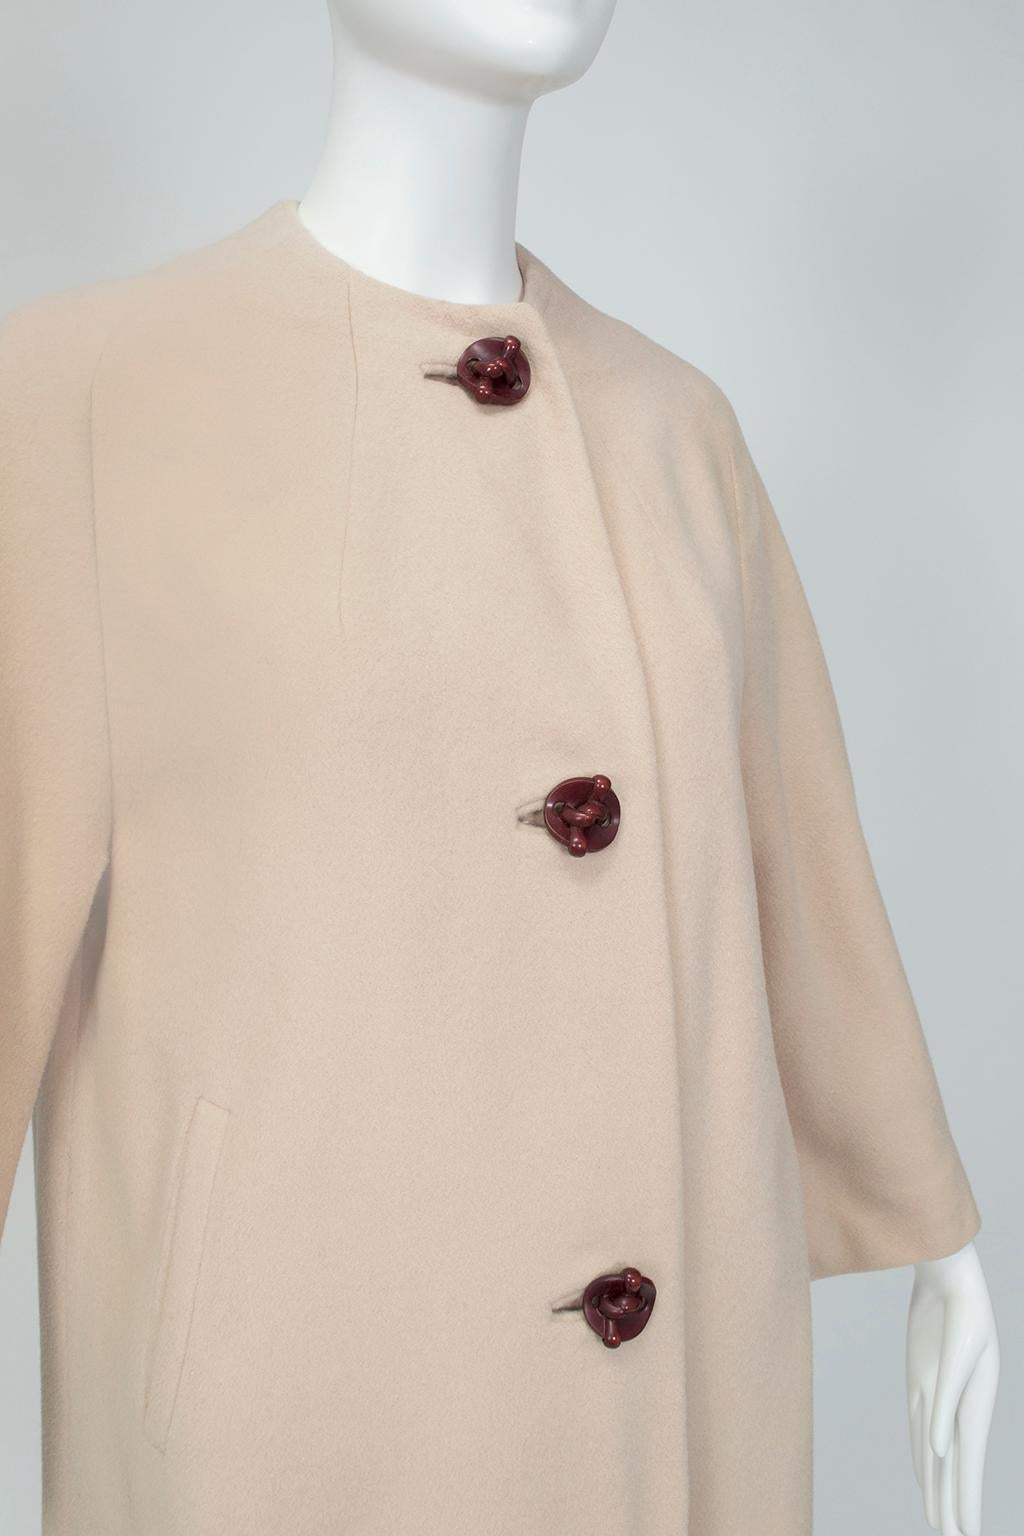 Women's Collarless Taupe Cashmere A-Line Stroller Coat with Bakelite Buttons- S-M, 1960s For Sale